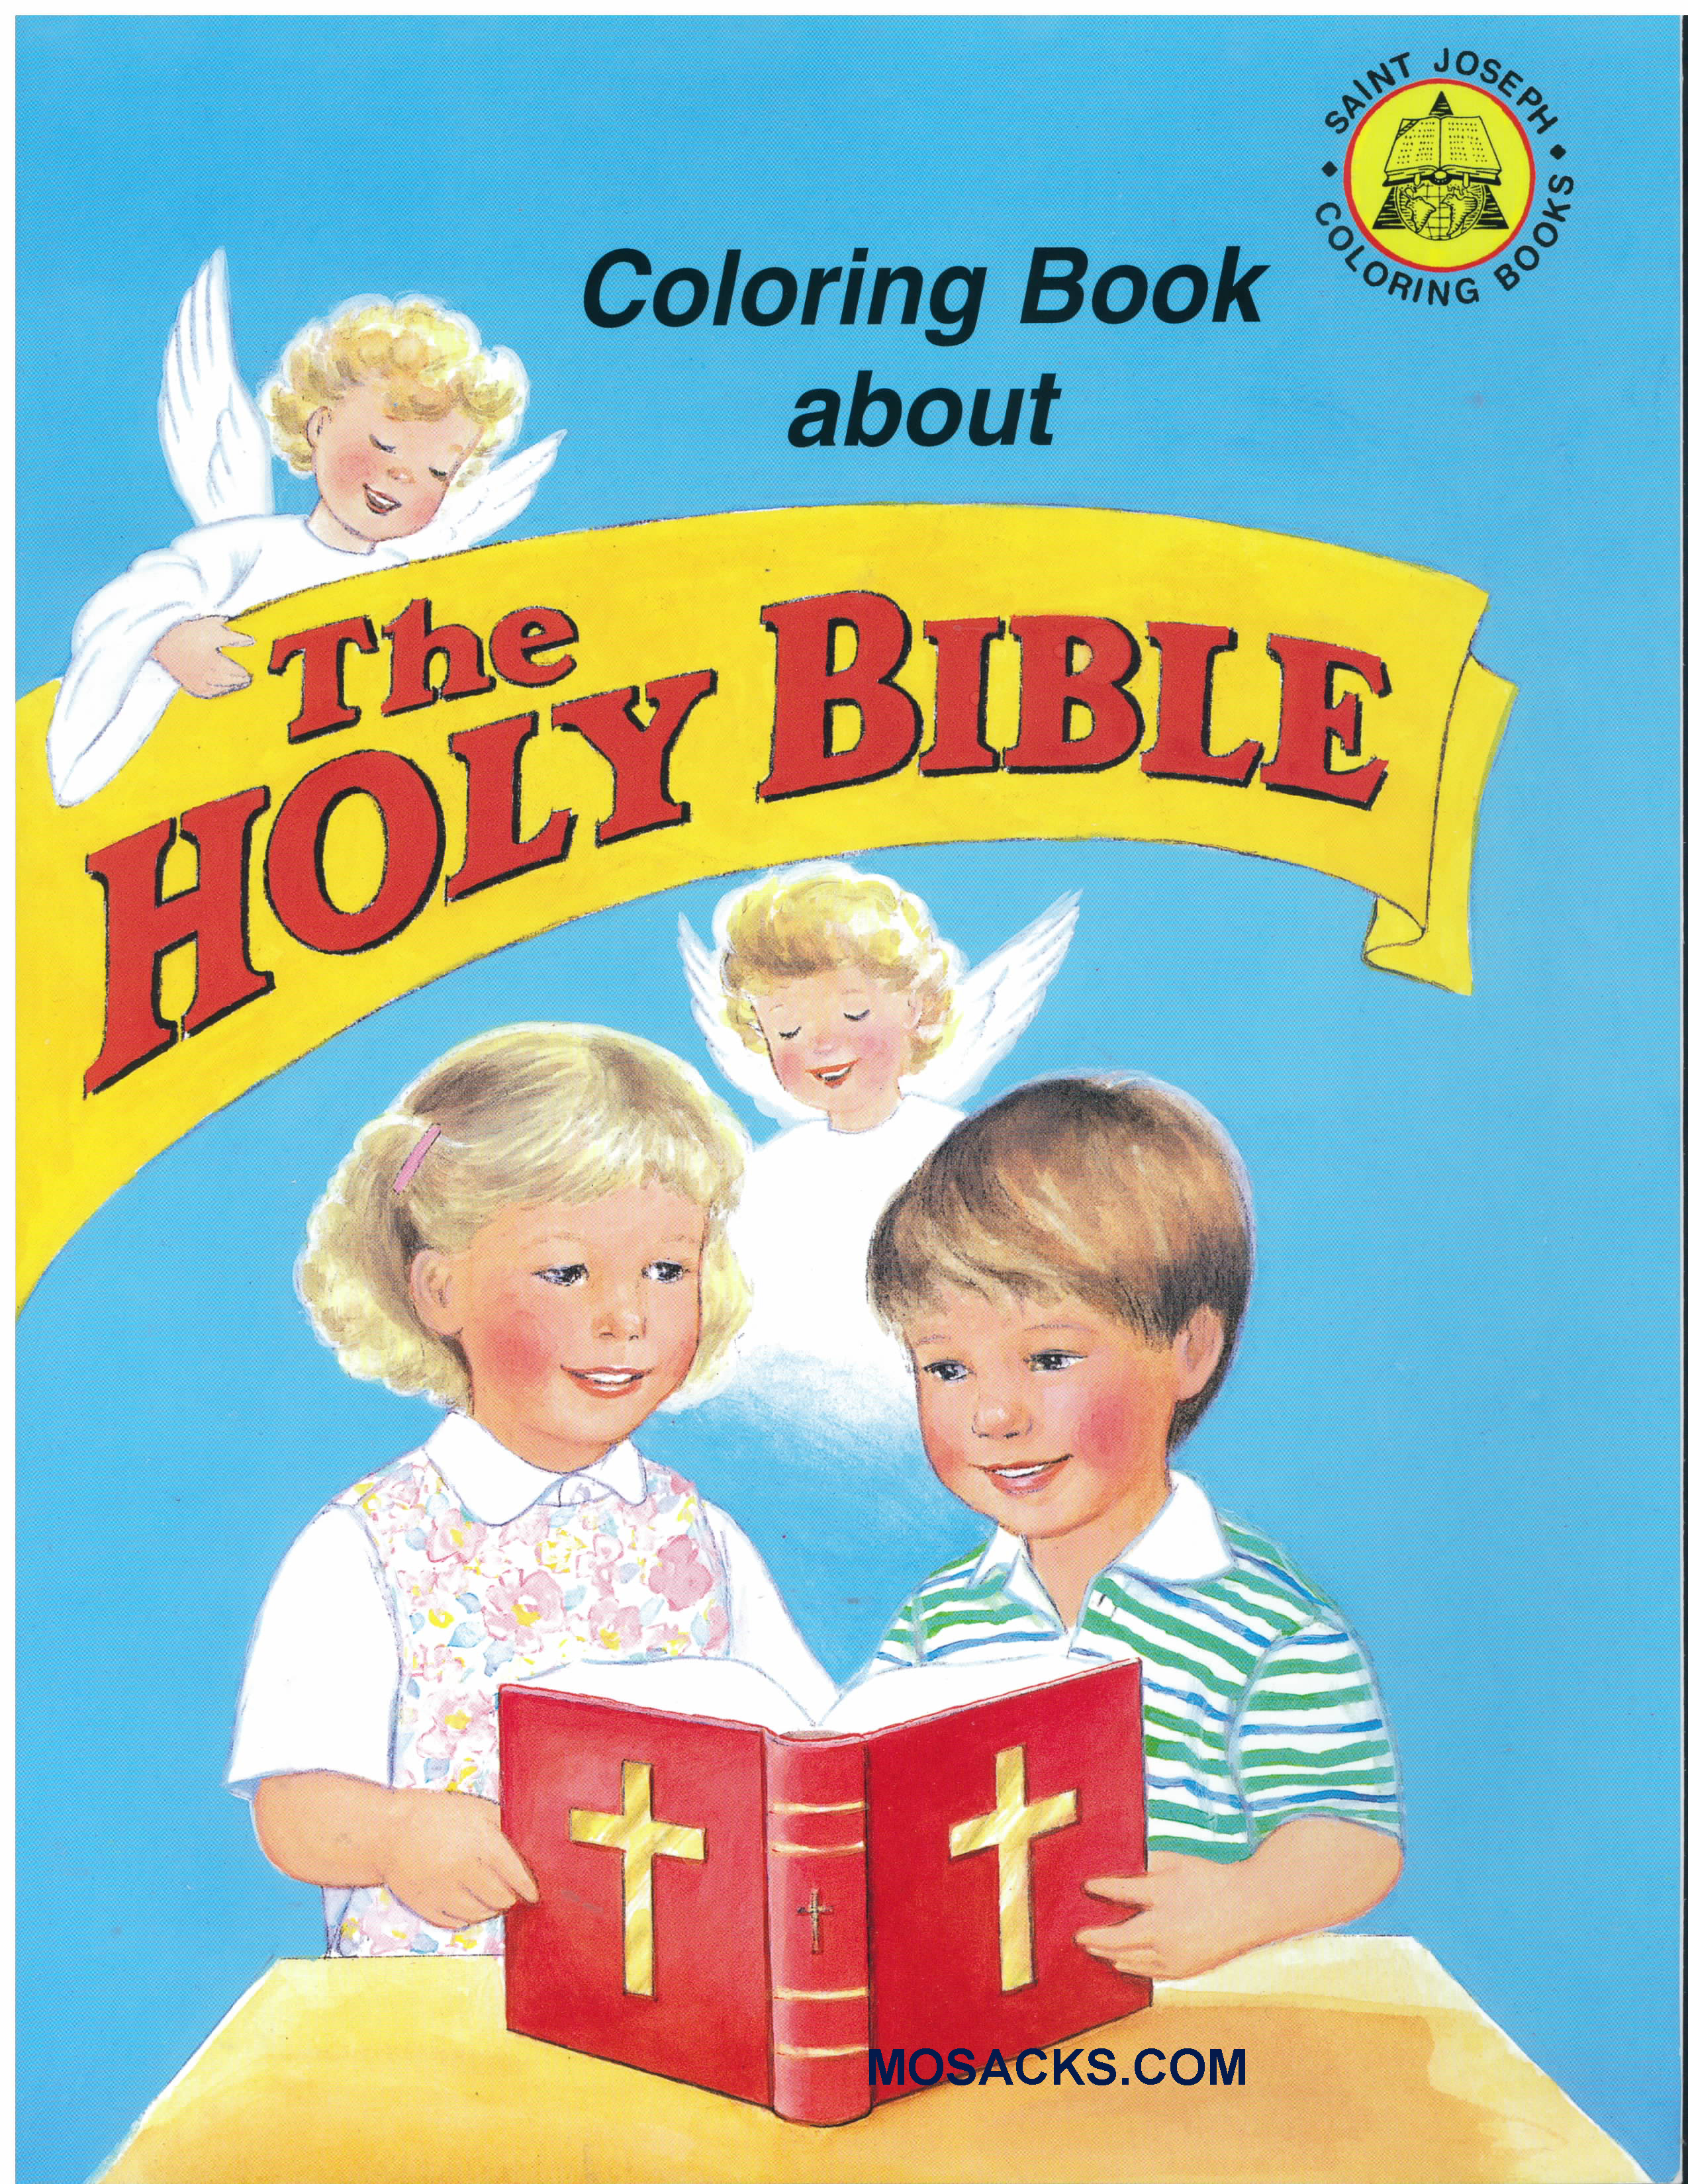 St Joseph 32 page Coloring Book About The Holy Bible-676